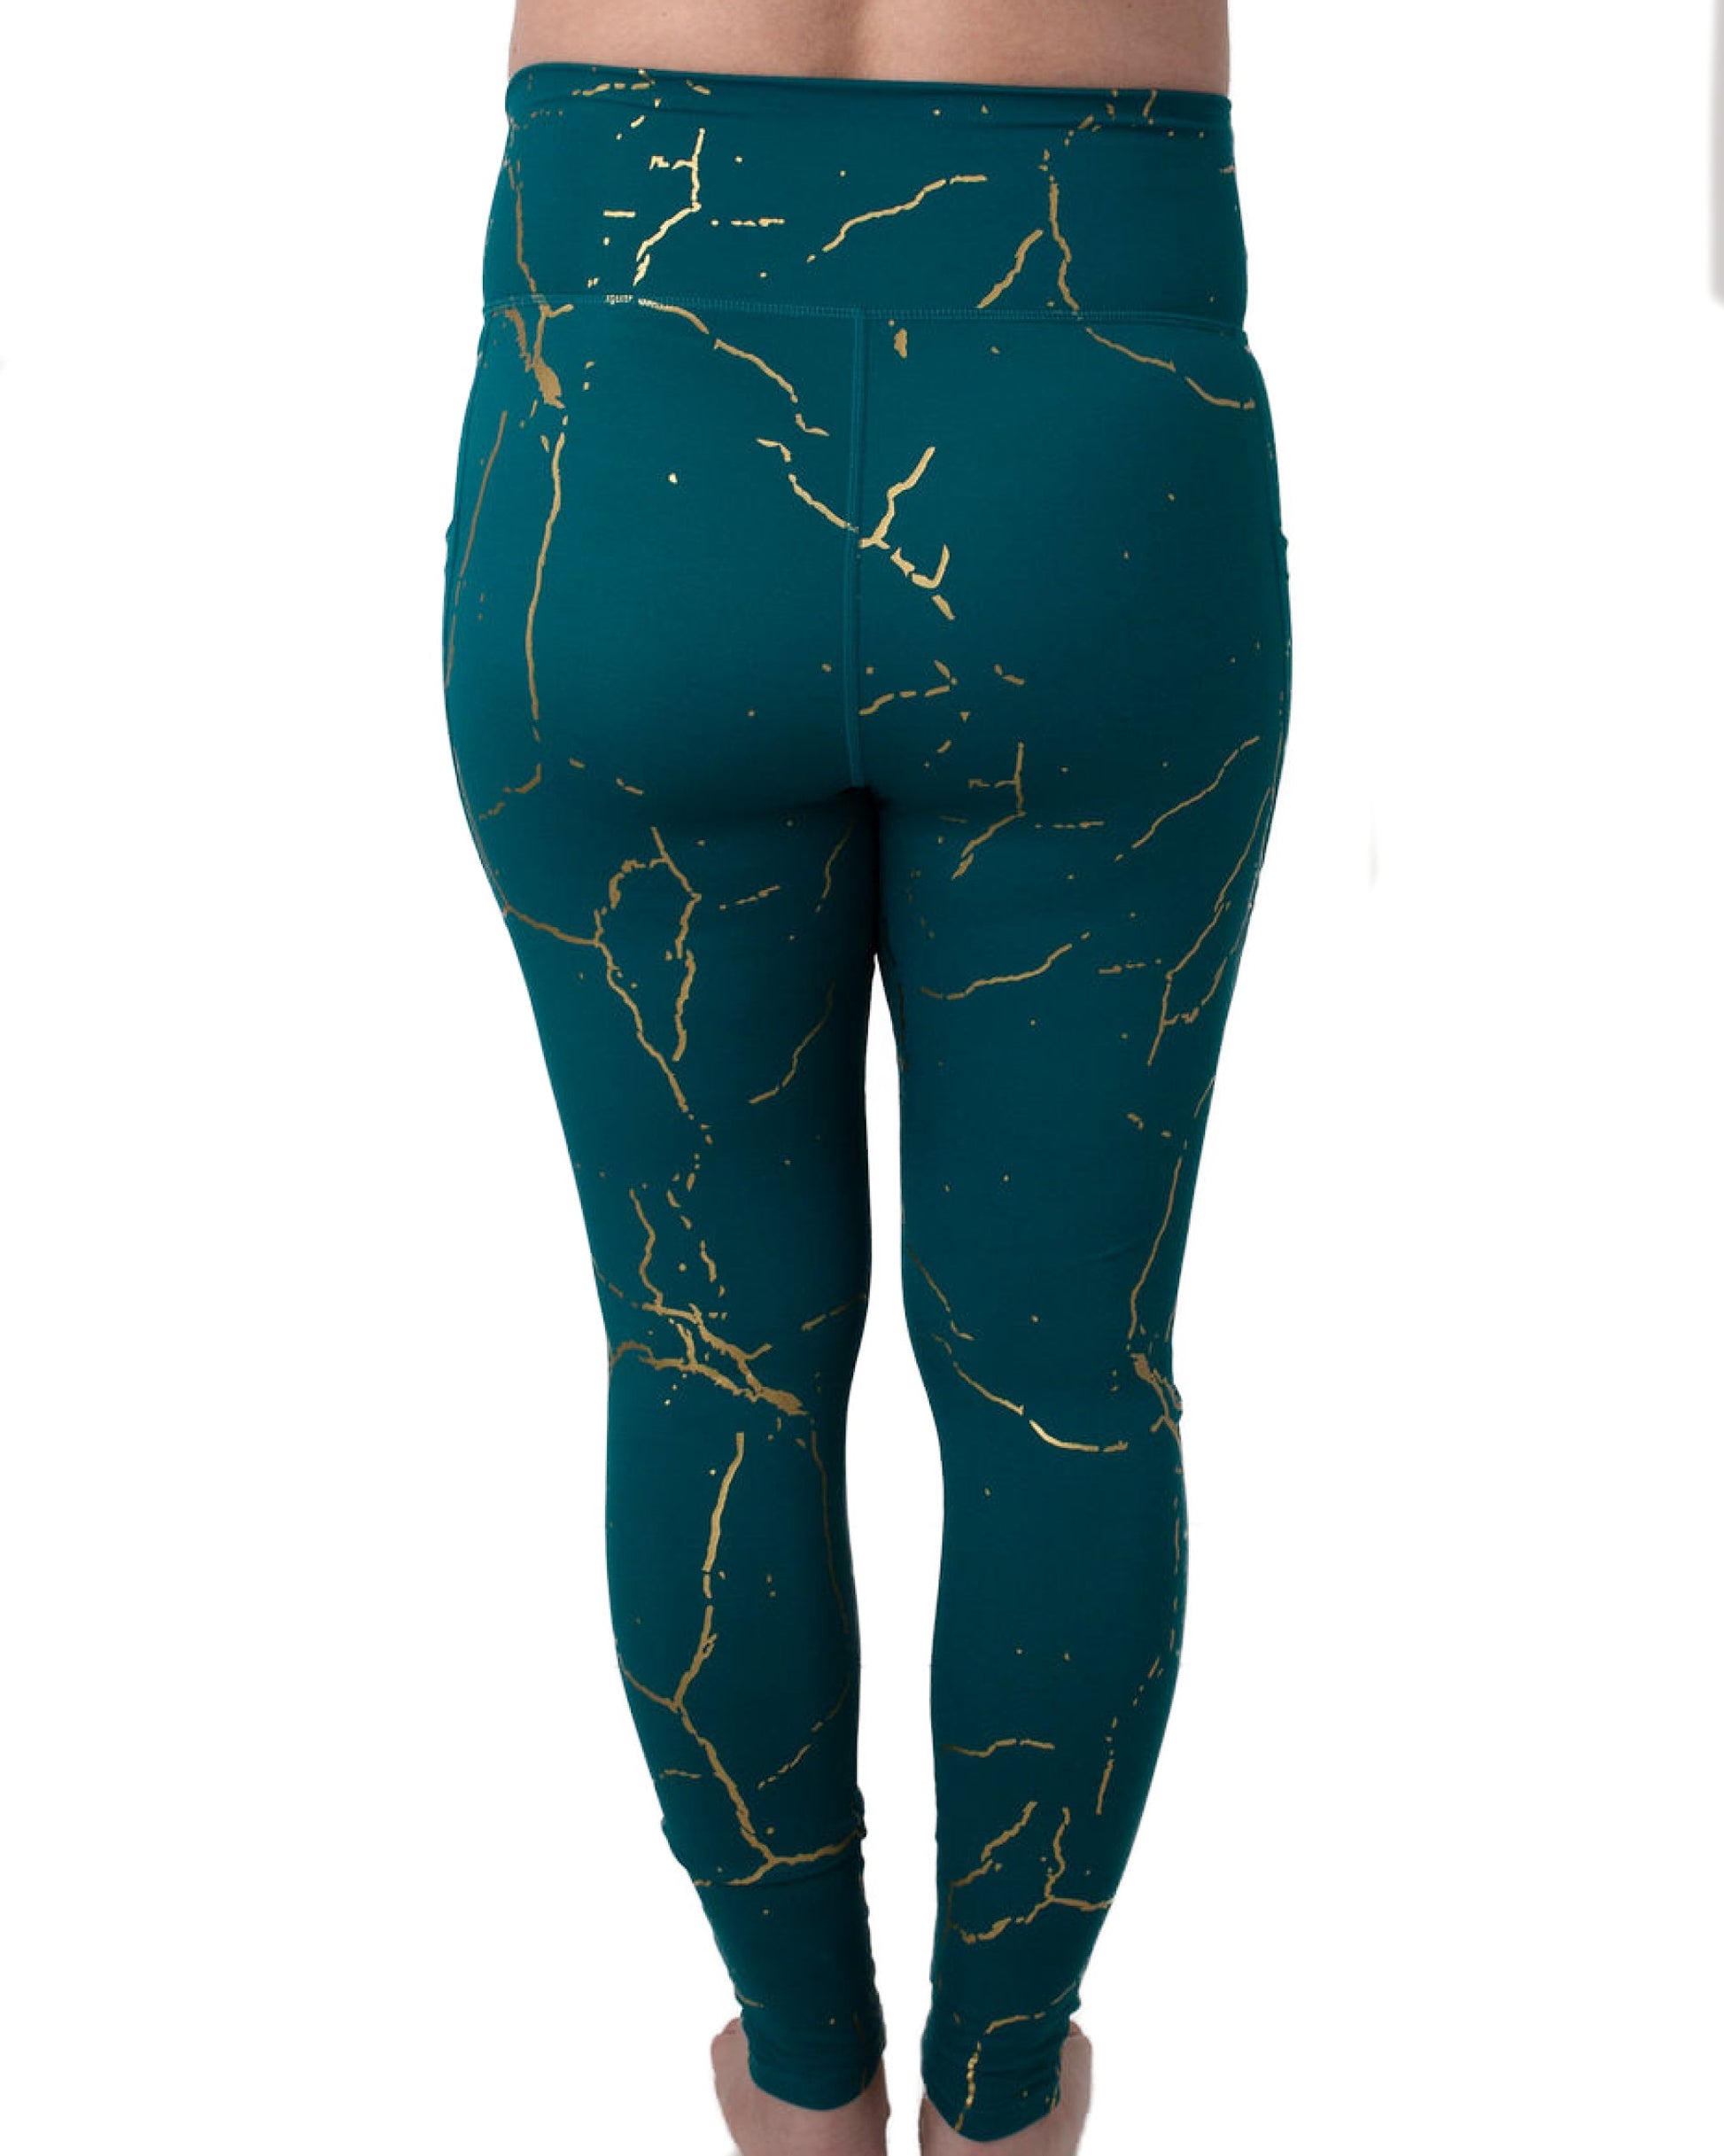 Back of maternity leggings in green and gold